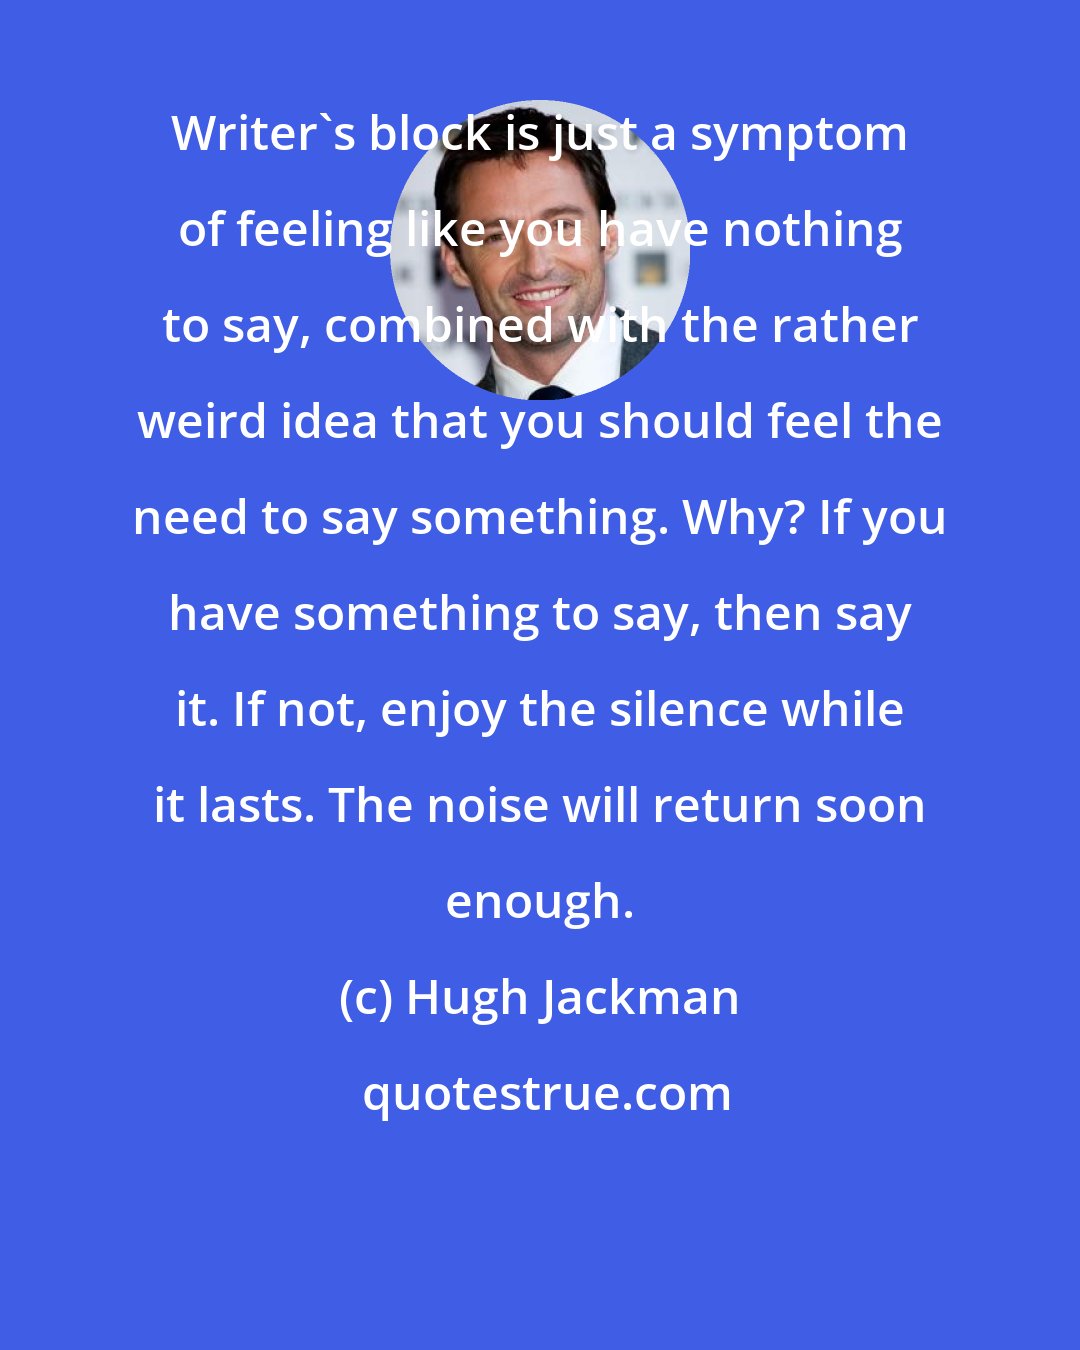 Hugh Jackman: Writer's block is just a symptom of feeling like you have nothing to say, combined with the rather weird idea that you should feel the need to say something. Why? If you have something to say, then say it. If not, enjoy the silence while it lasts. The noise will return soon enough.